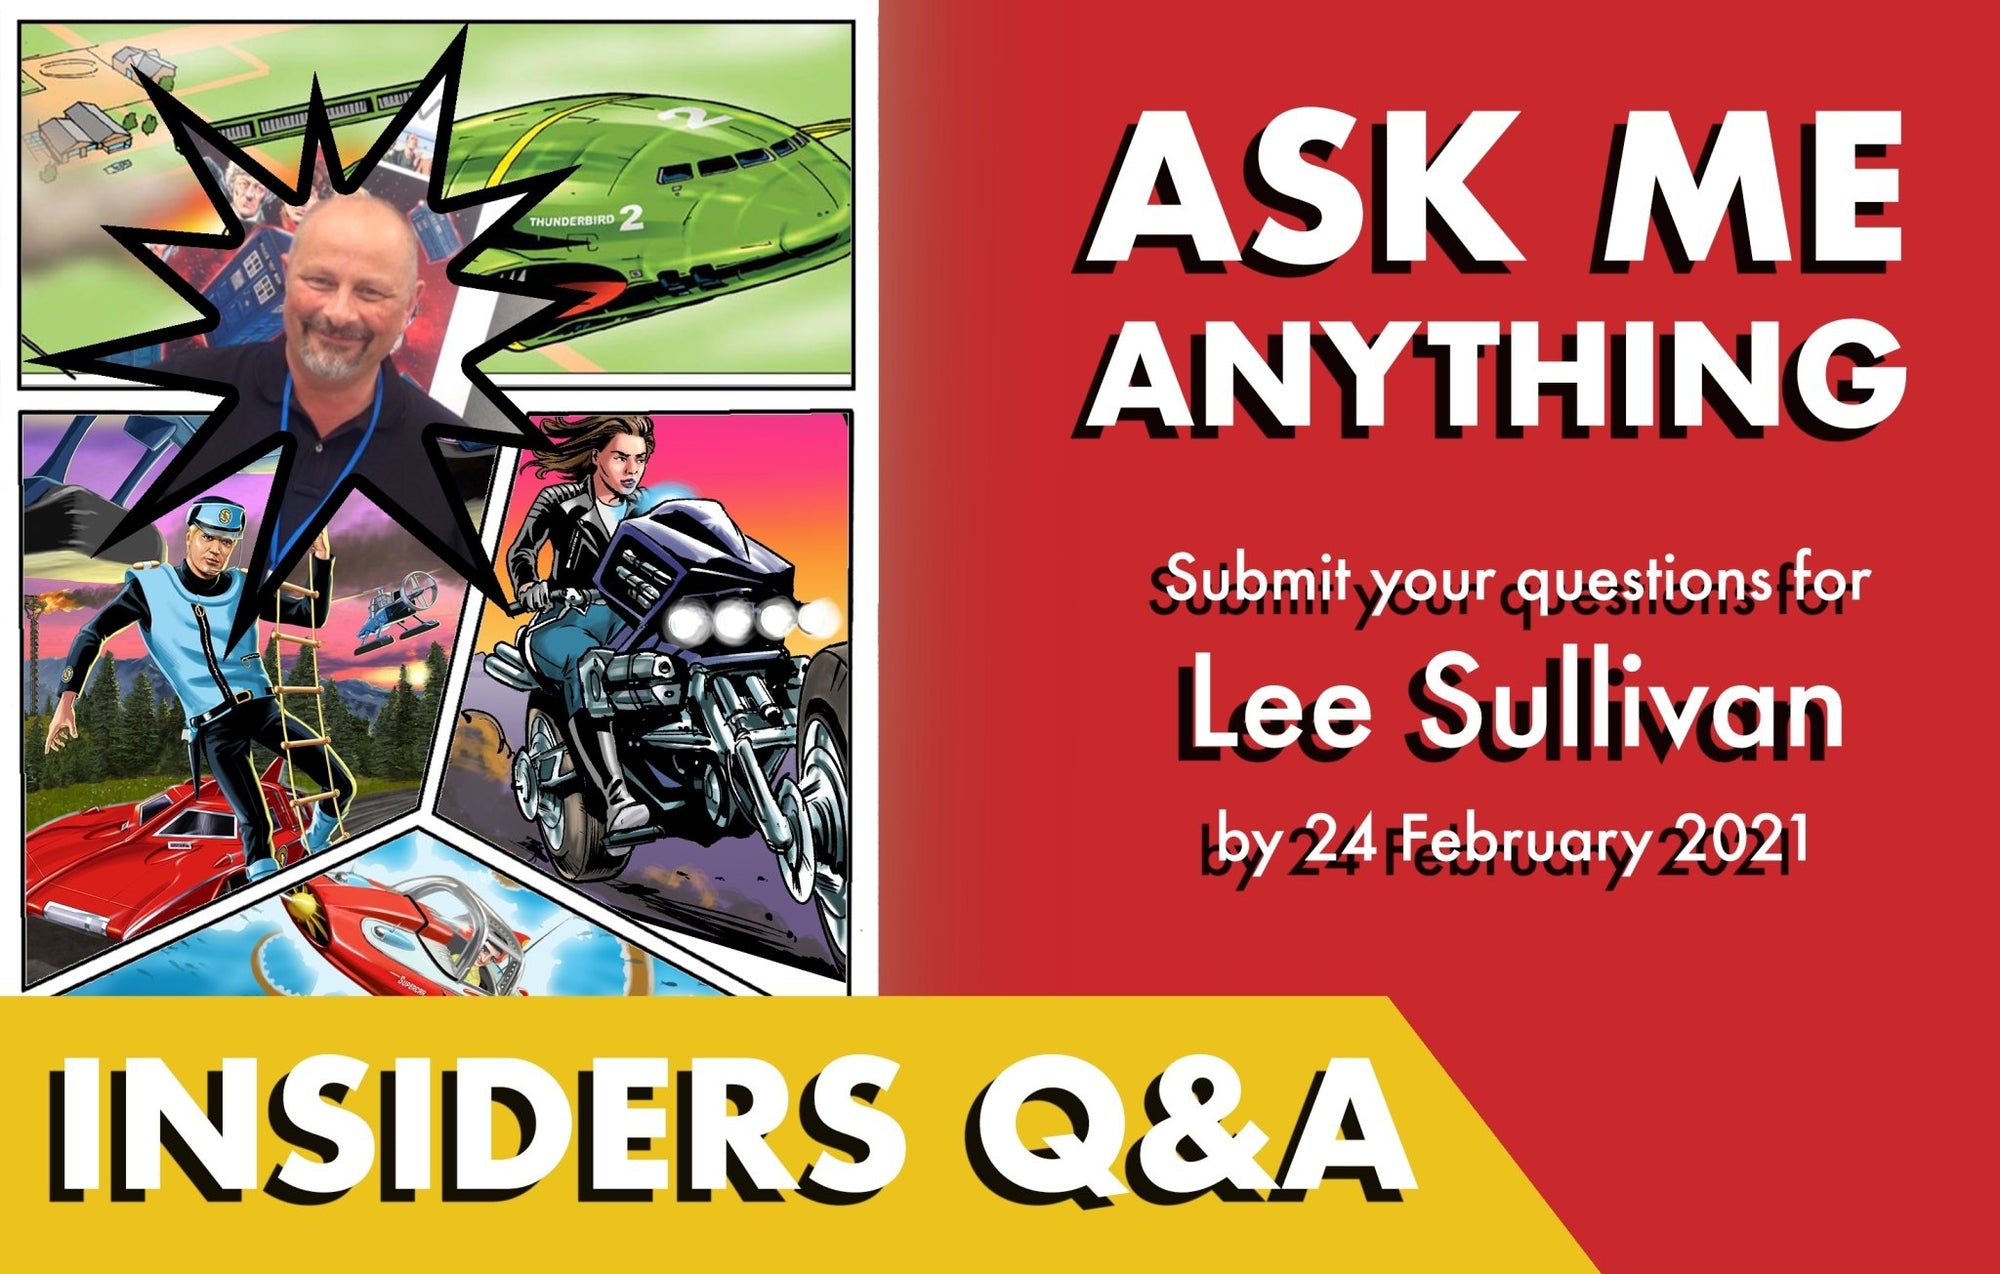 Questions for Lee Sullivan? - The Gerry Anderson Store